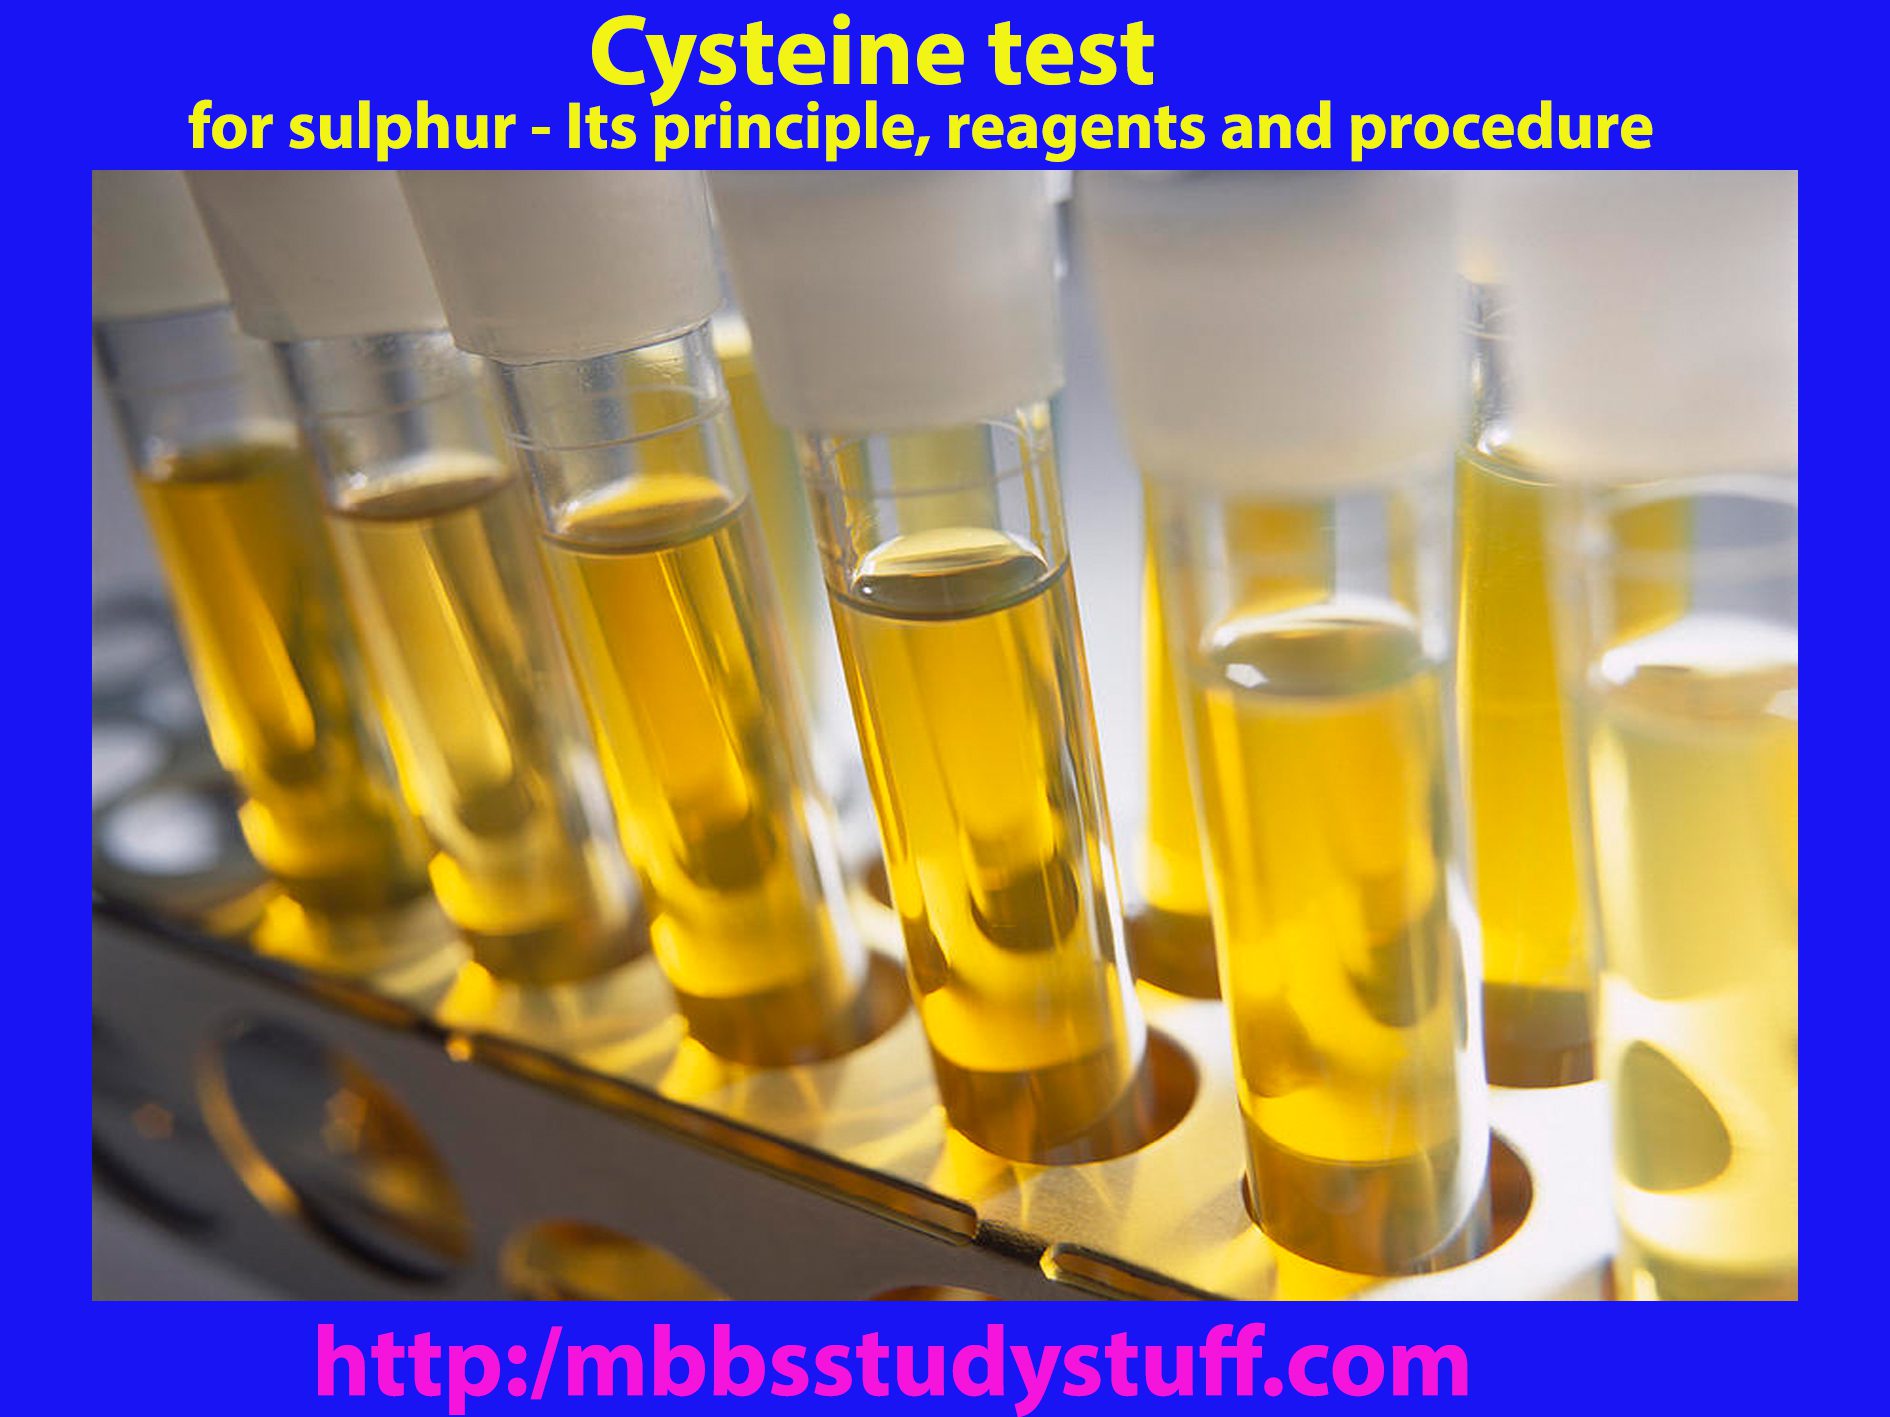 Cysteine test for sulphur - Its principle, reagents and procedure